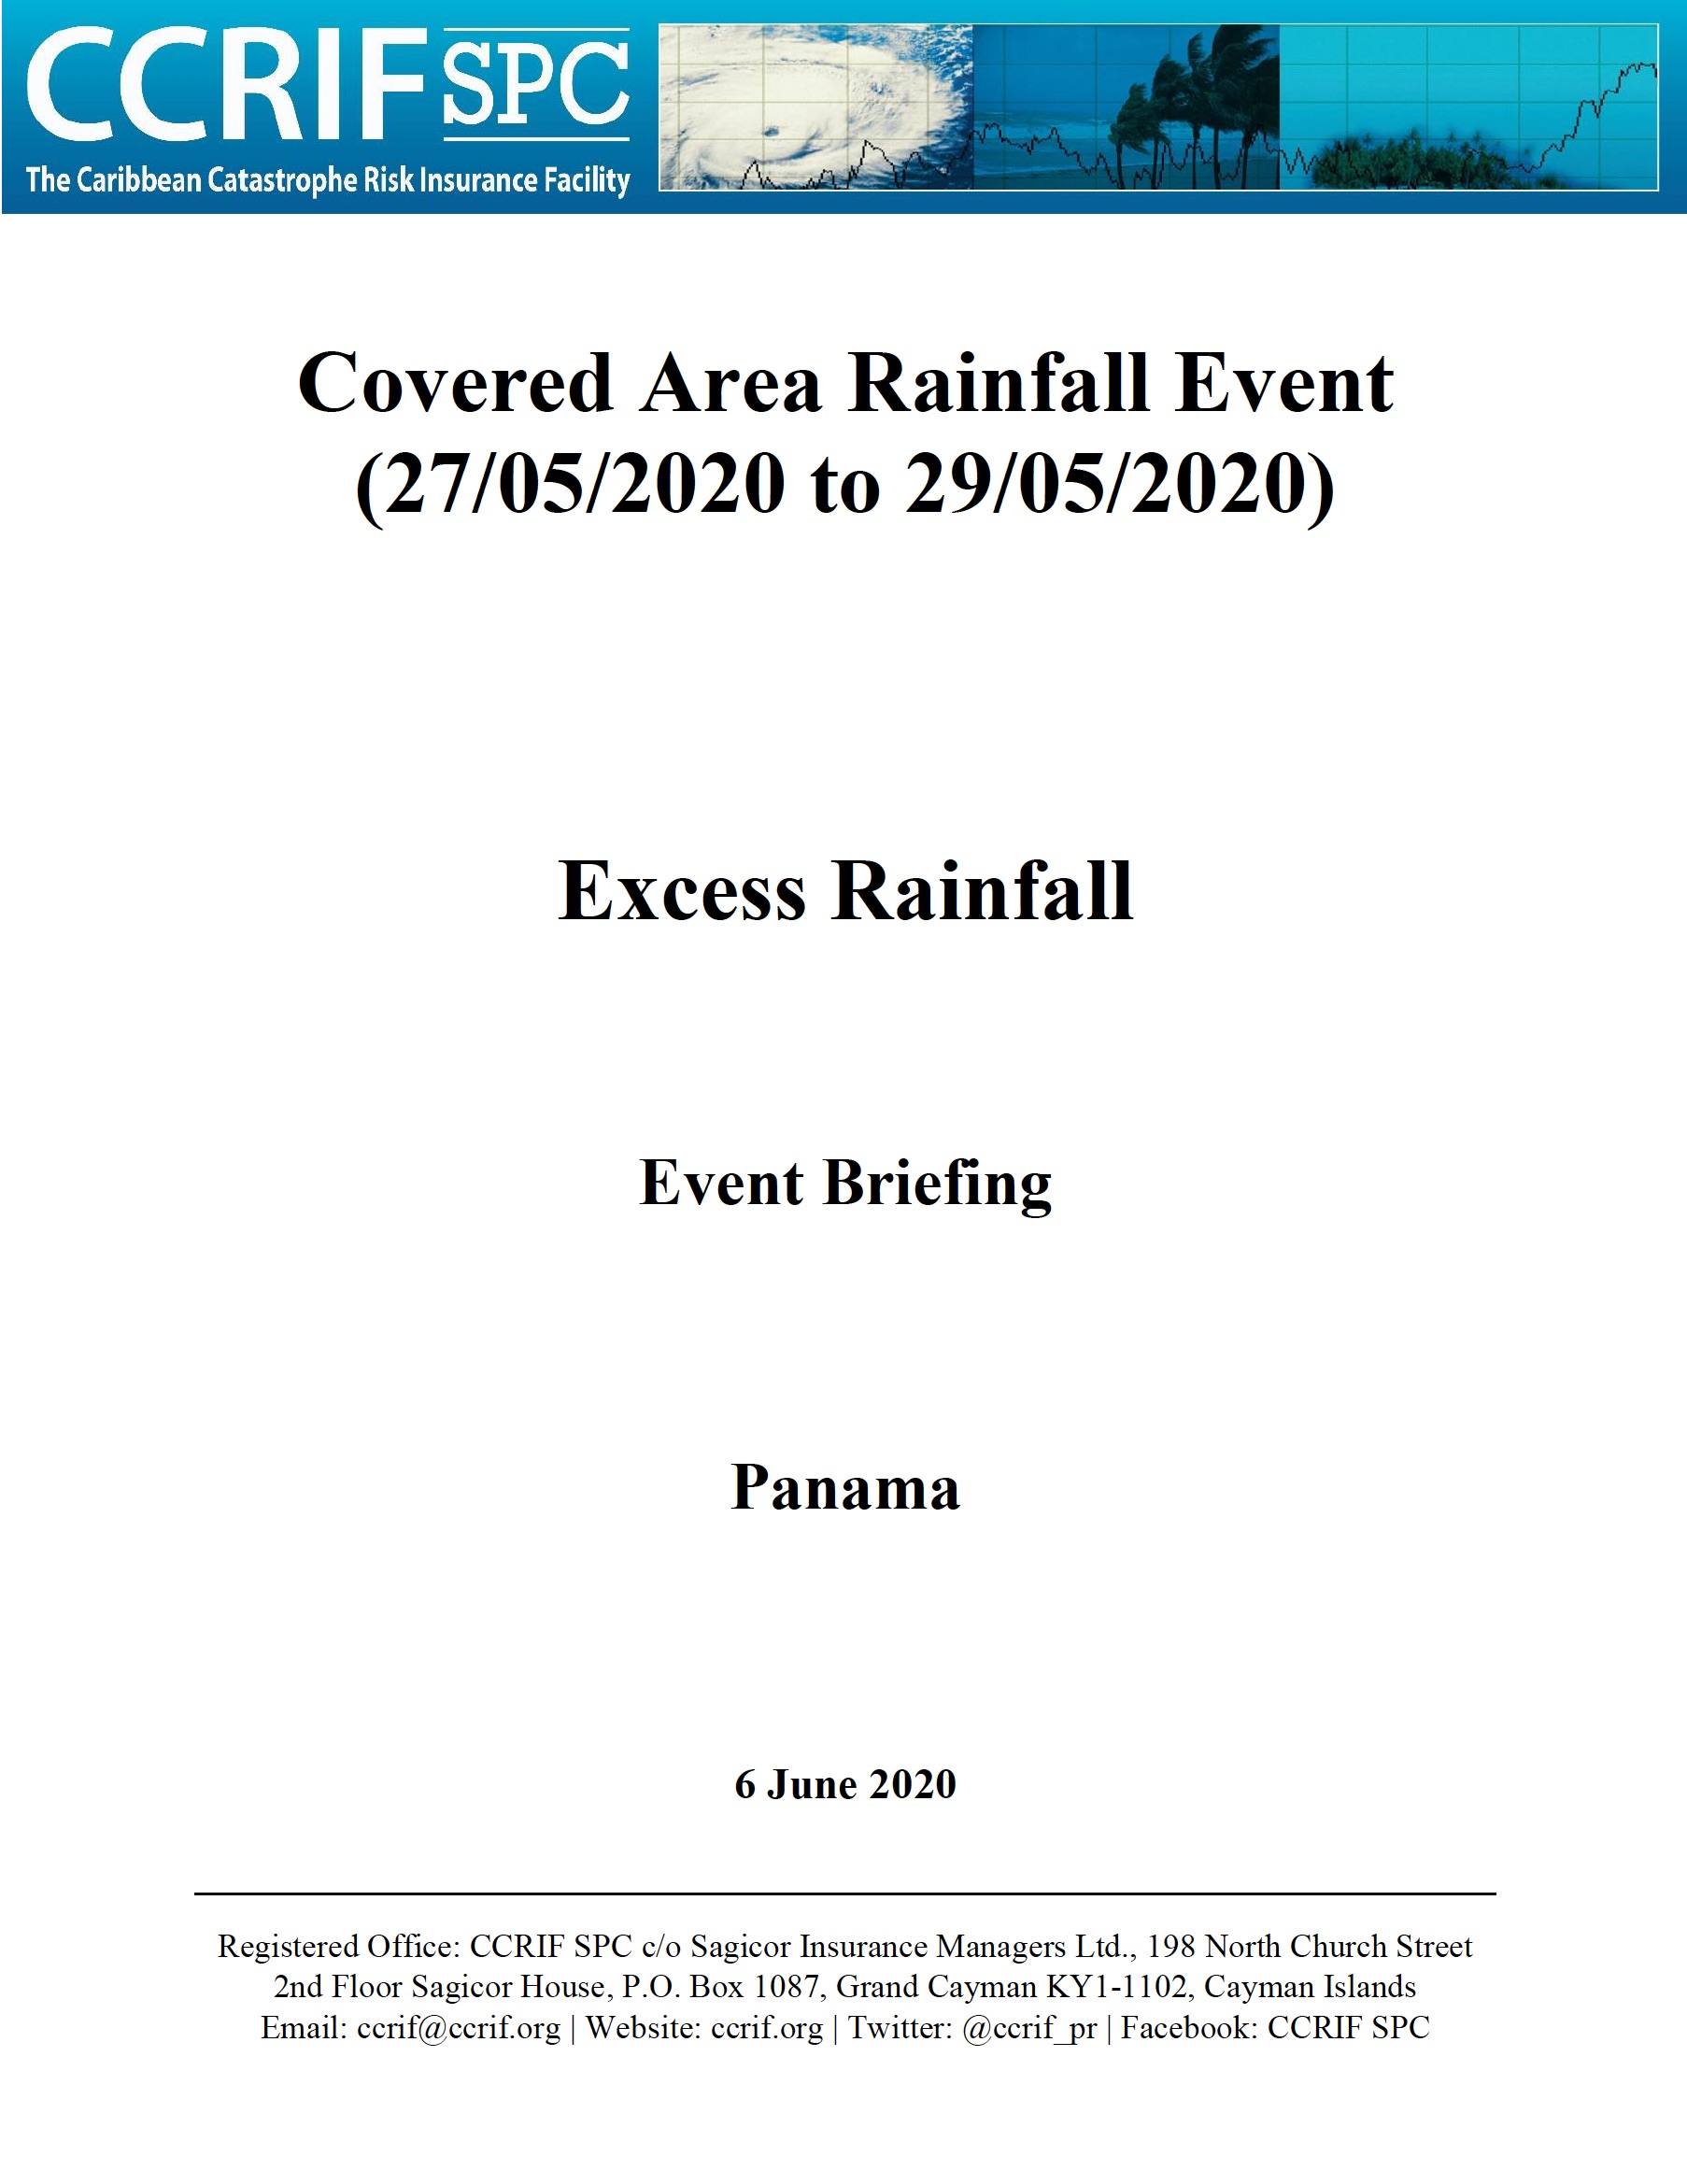 Event Briefing - Excess Rainfall - Covered Area Rainfall Event - Panama- June 6 2020